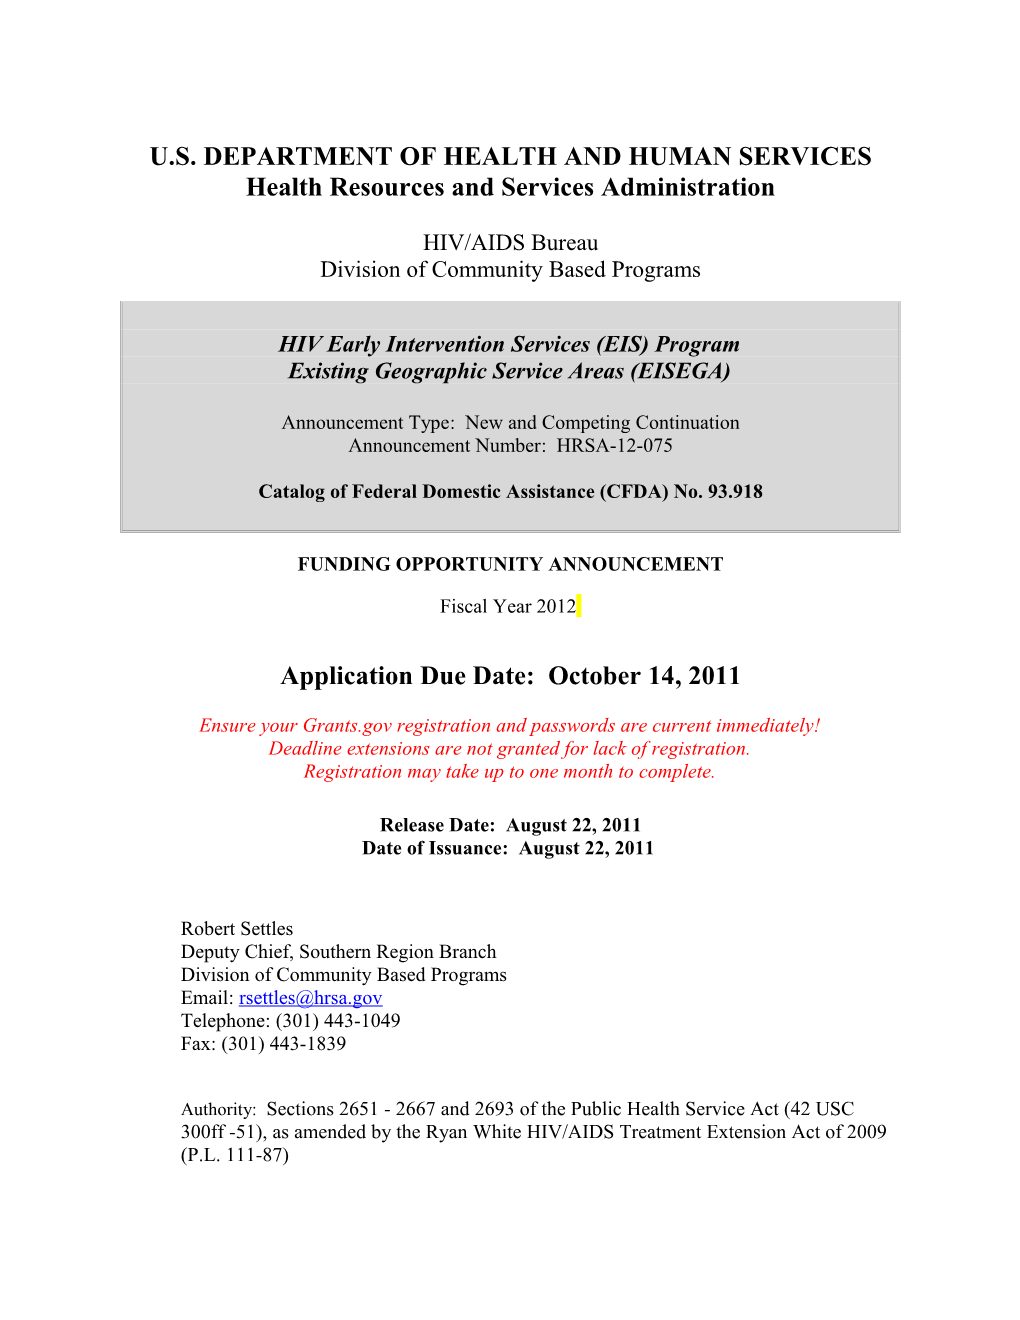 HRSA Funding Opportunity Announcement Template